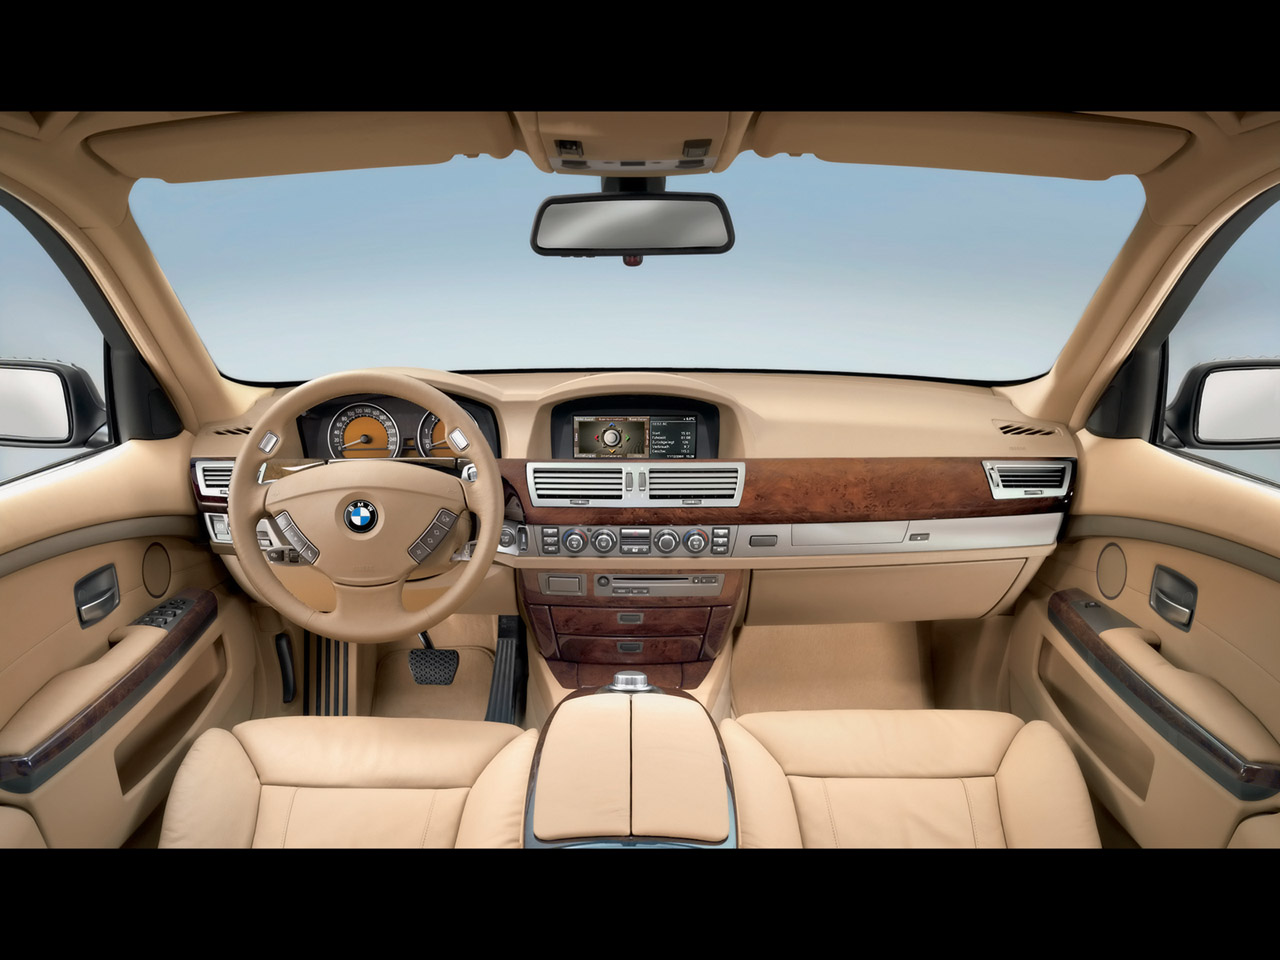 design of bmw 7 series 2012 review back side view of bmw 7 series ...